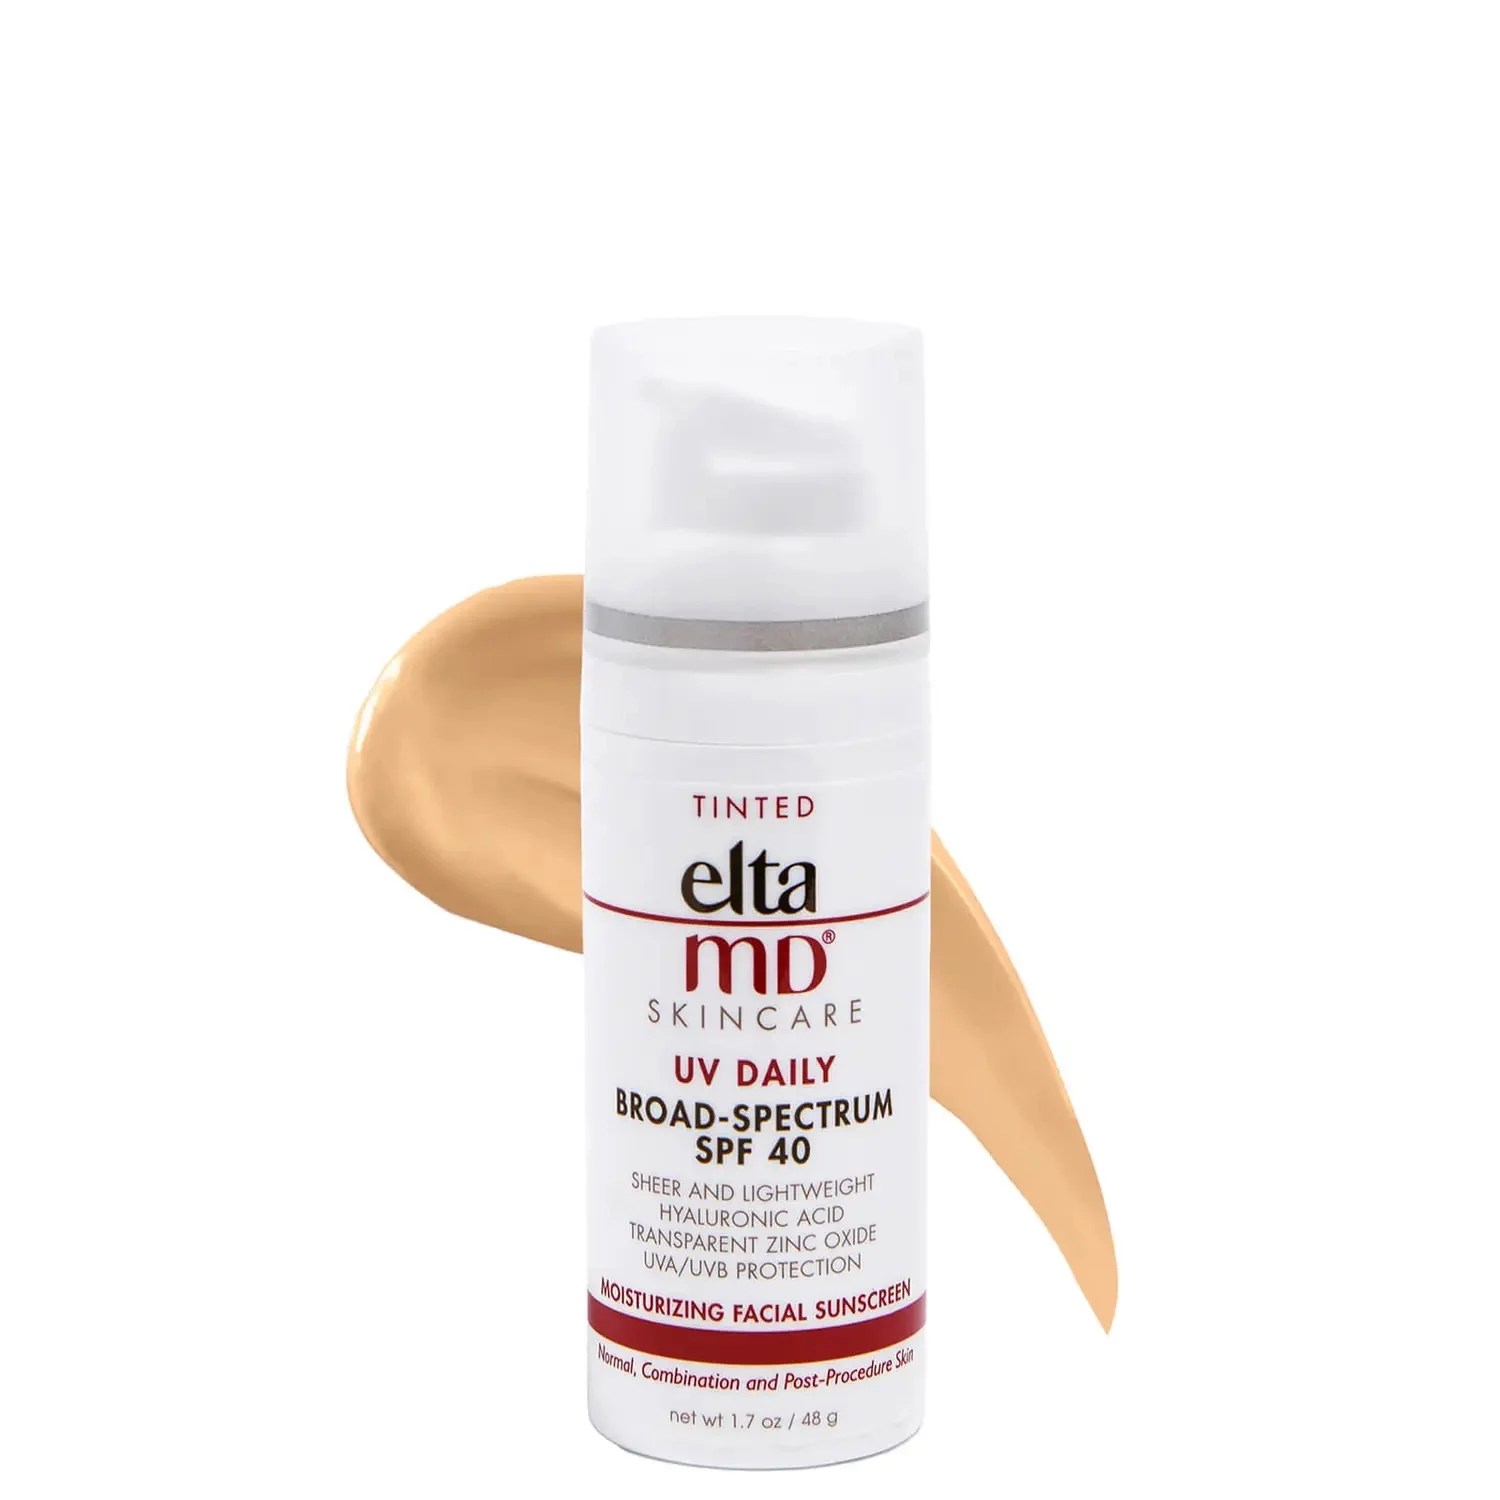 EltaMD uv daily broad spectrum tinted moisturizer, one of the best water-based primers